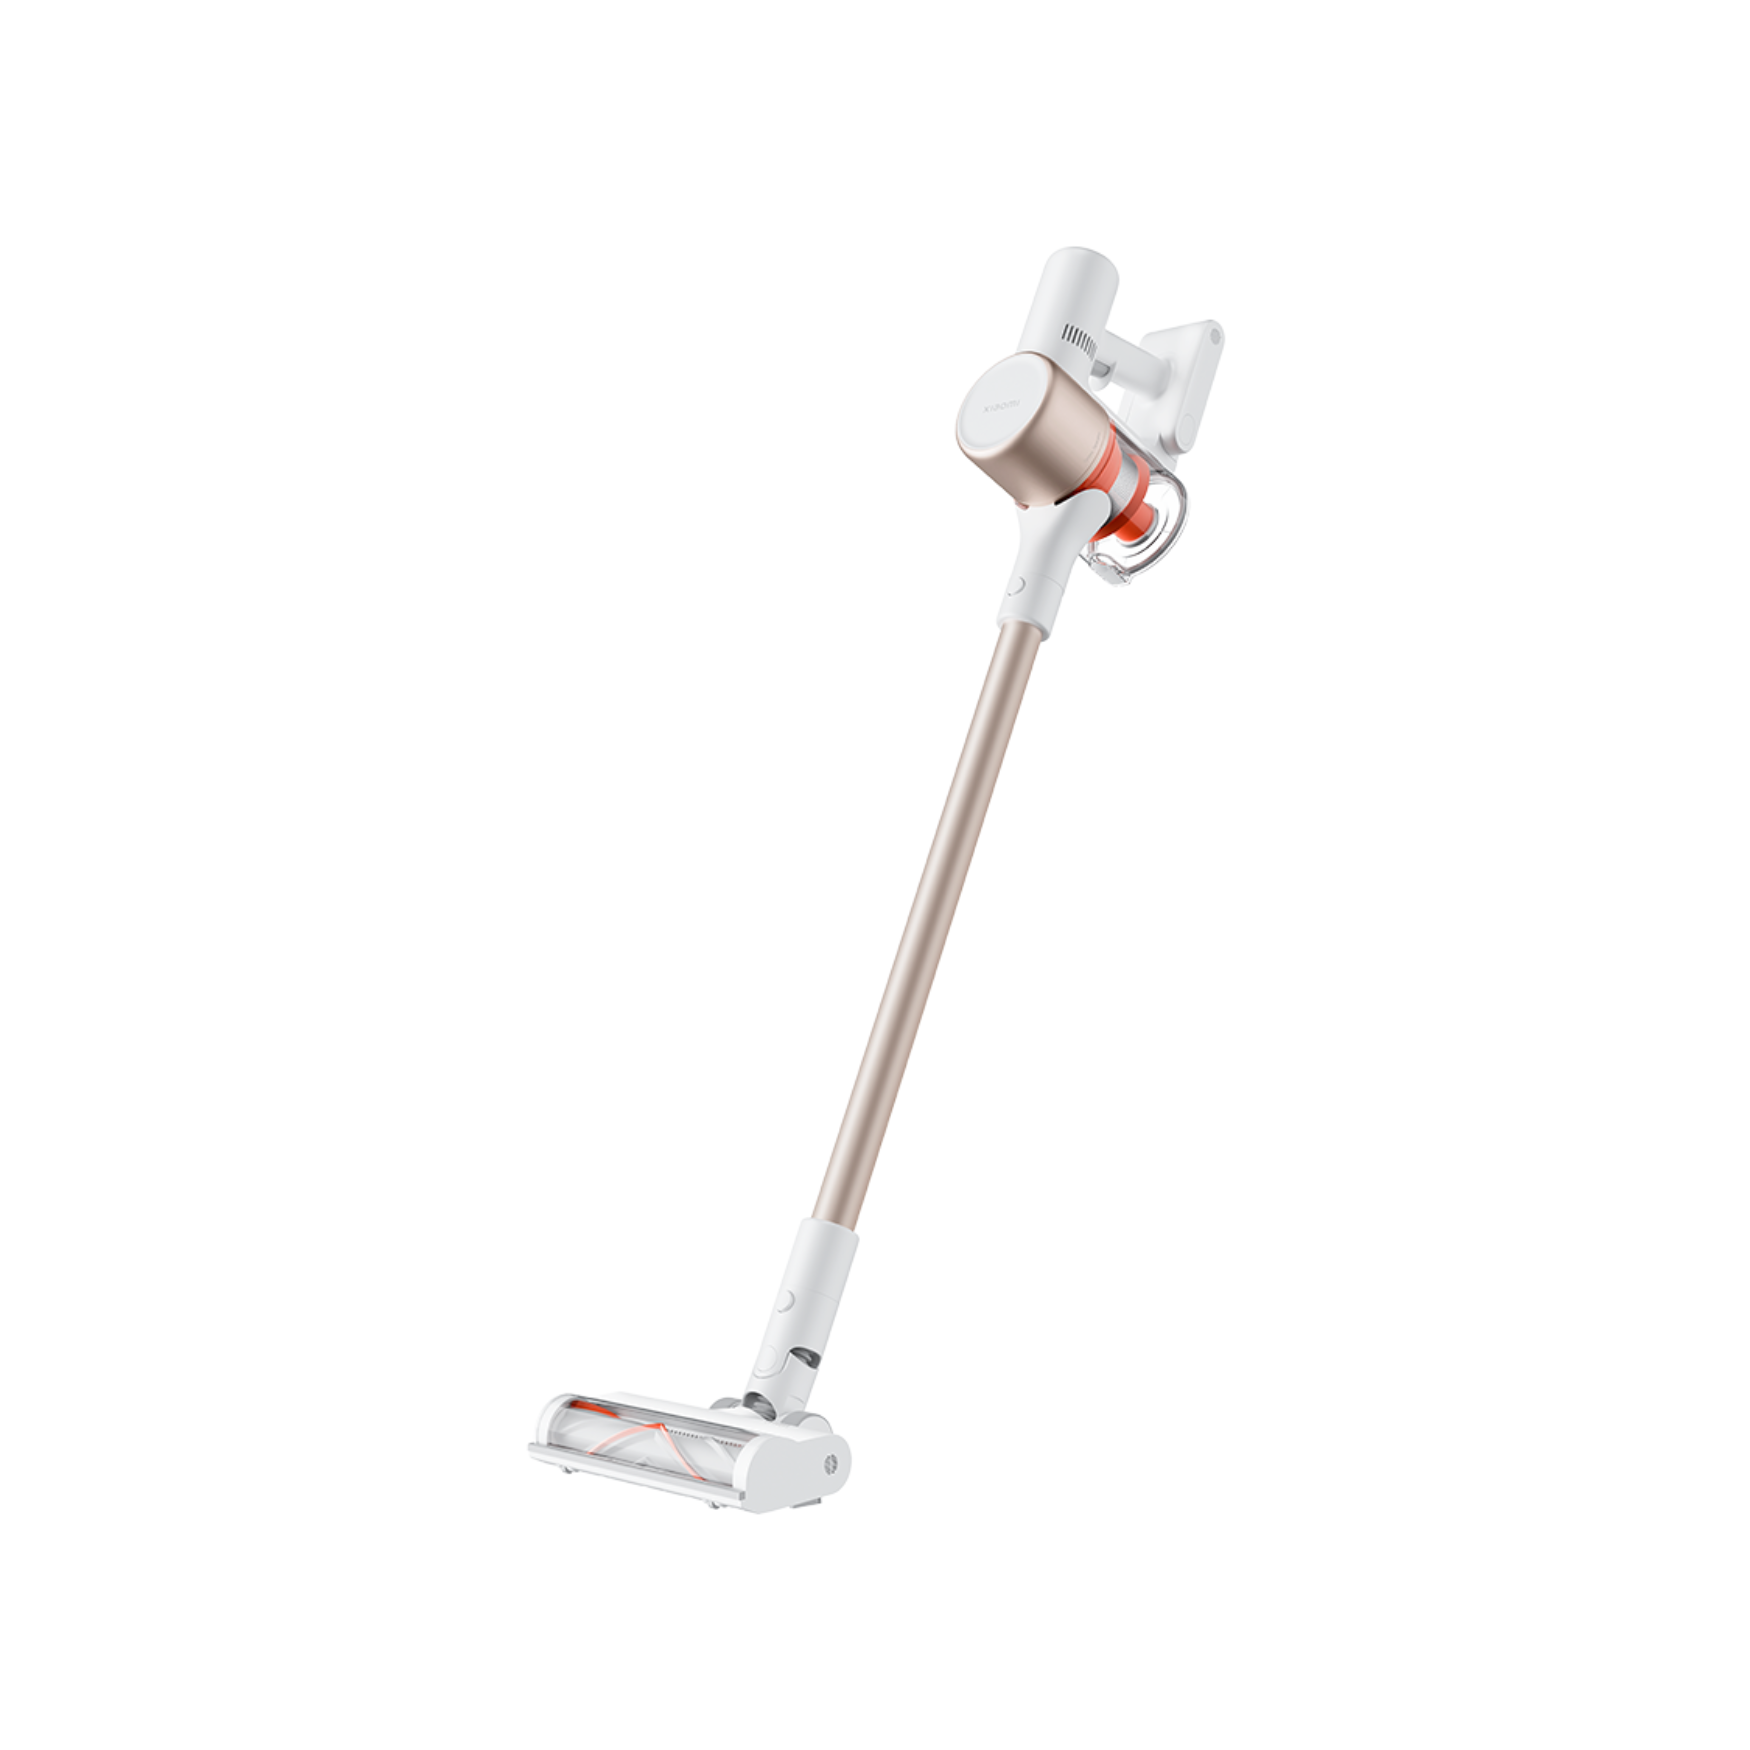 Xiaomi Vacuum Cleaner G9 Plus Maximum of 120AW suction power/Extra-long battery life/All-new 2-in -1 bursh head set